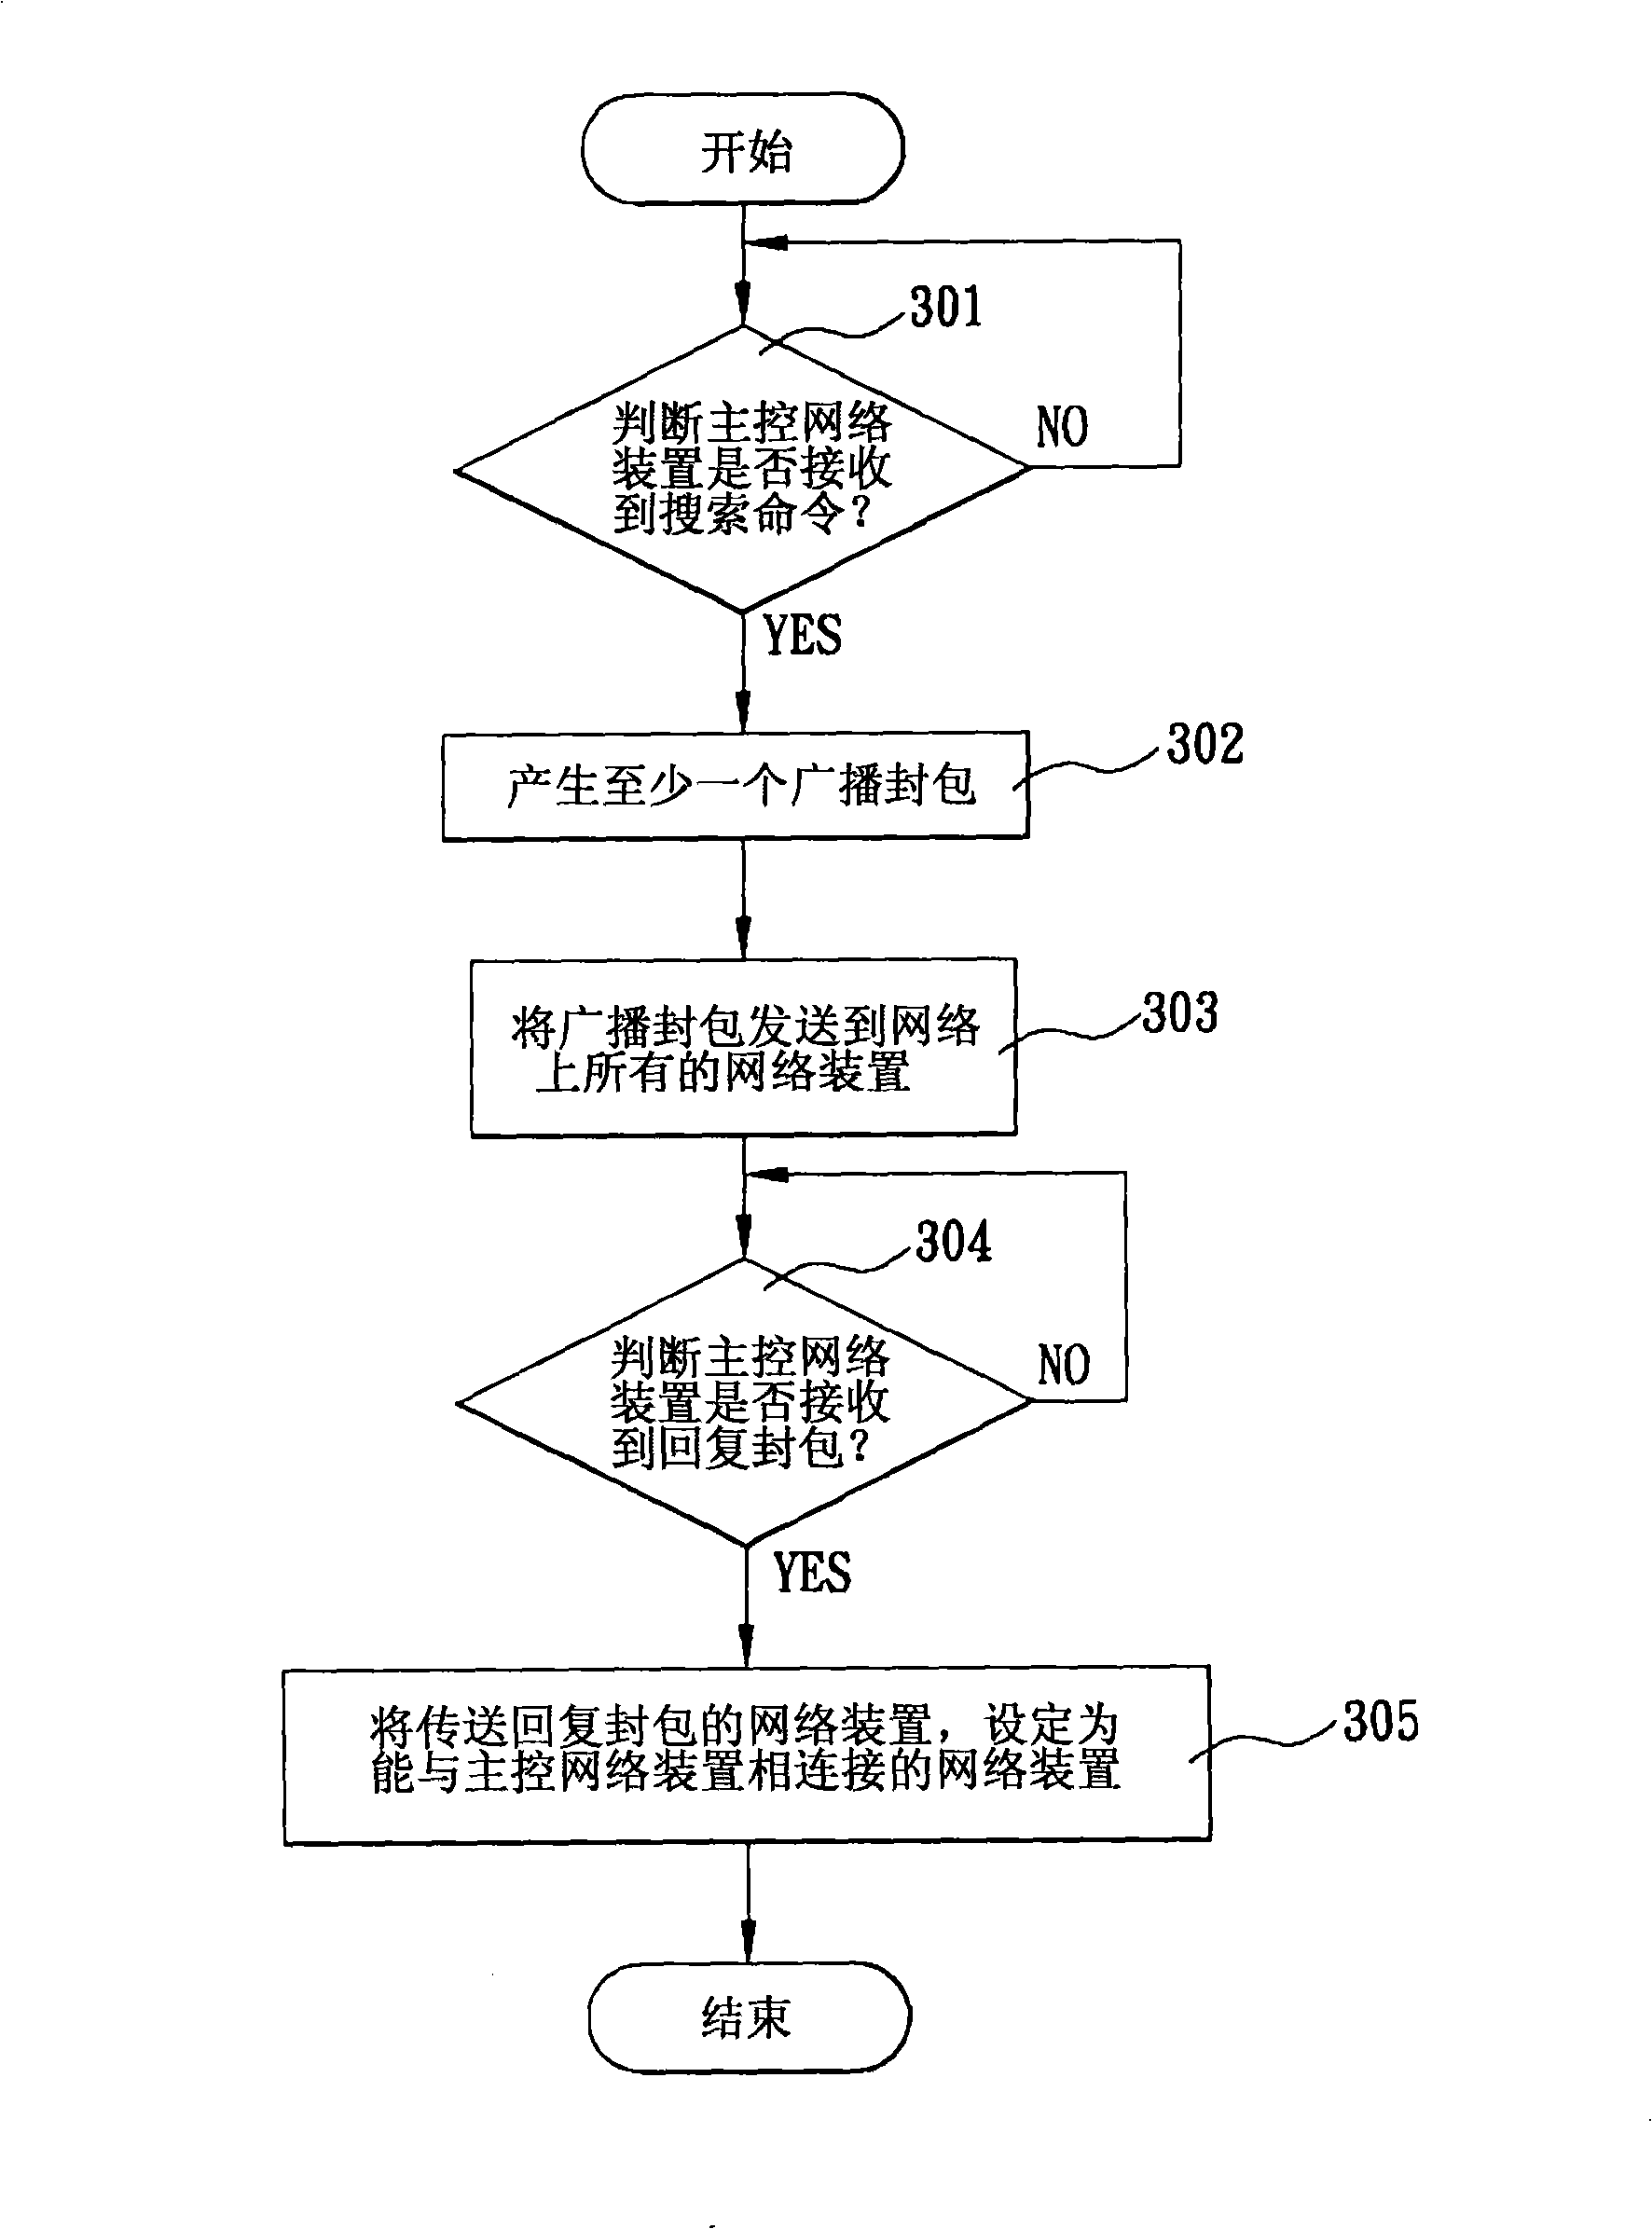 Method for managing and setting a plurality of network devices